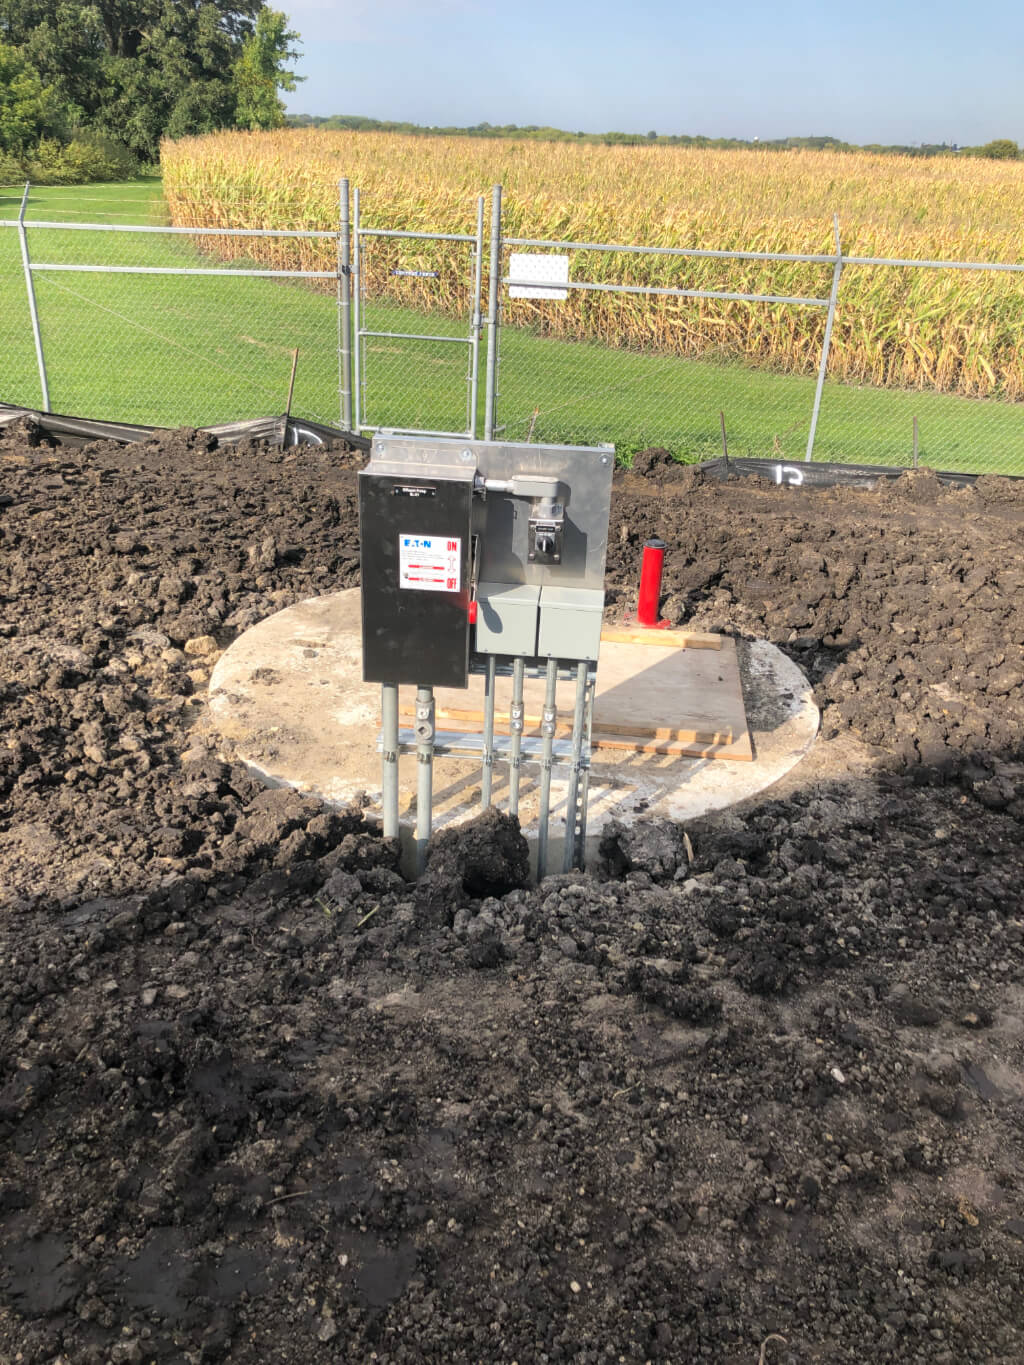 Water treatment controls protruding from dirt in front of a cornfield